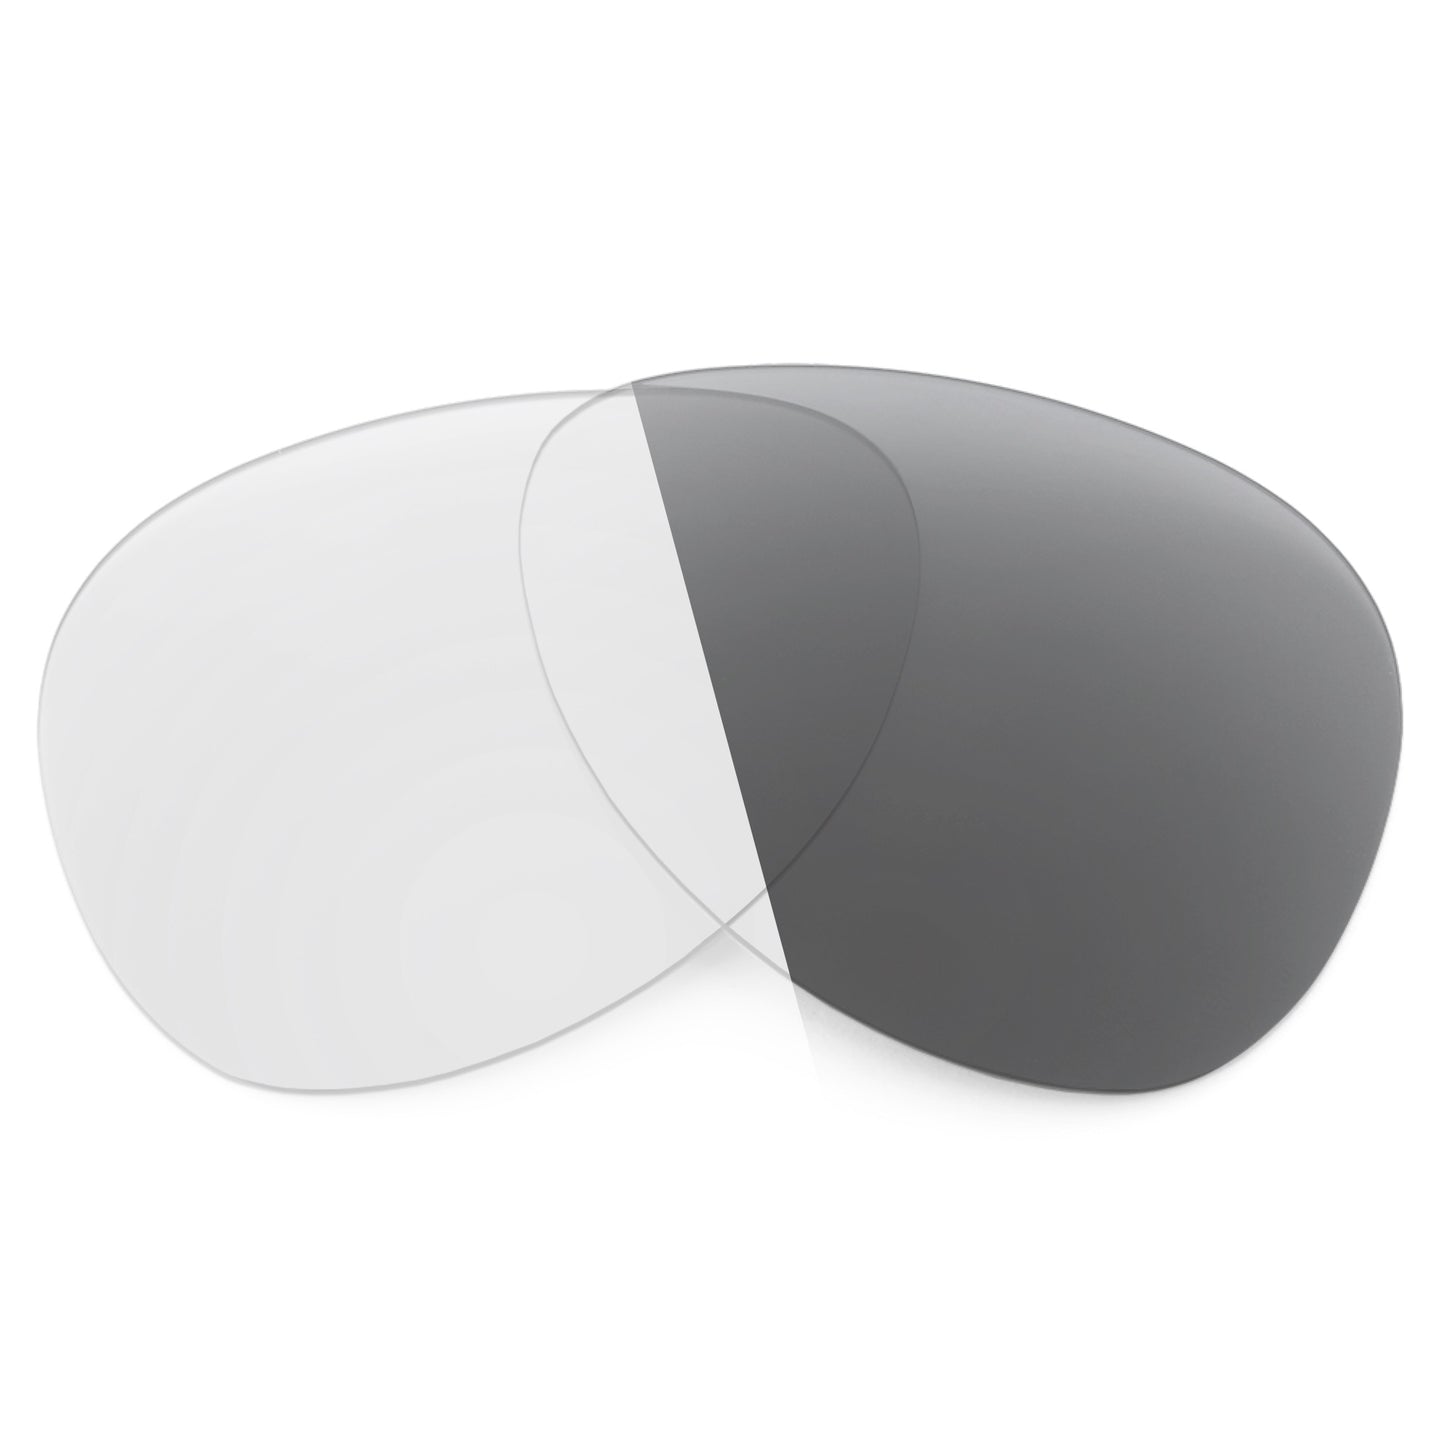 Revant replacement lenses for Ray-Ban RB4147 60mm Non-Polarized Adapt Gray Photochromic